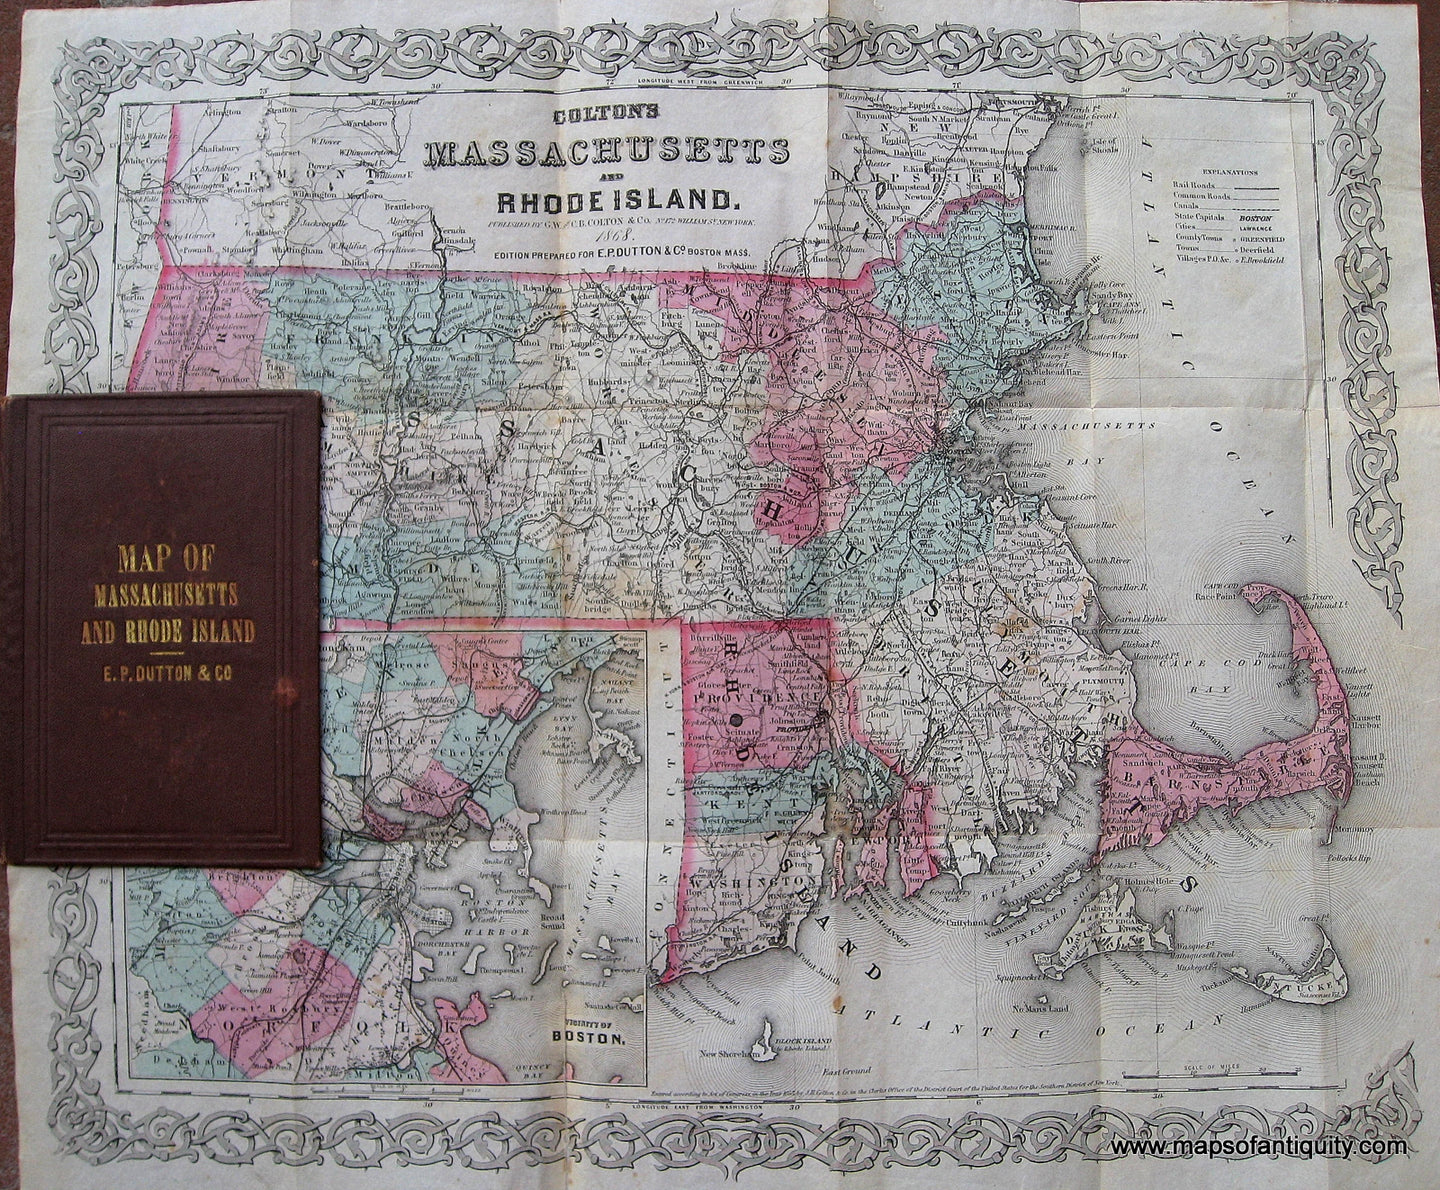 Antique-Folding-Map--Colton's-Map-of-Massachusetts-and-Rhode-Island-Massachusetts-Rhode-Island-1868-Colton-Maps-Of-Antiquity